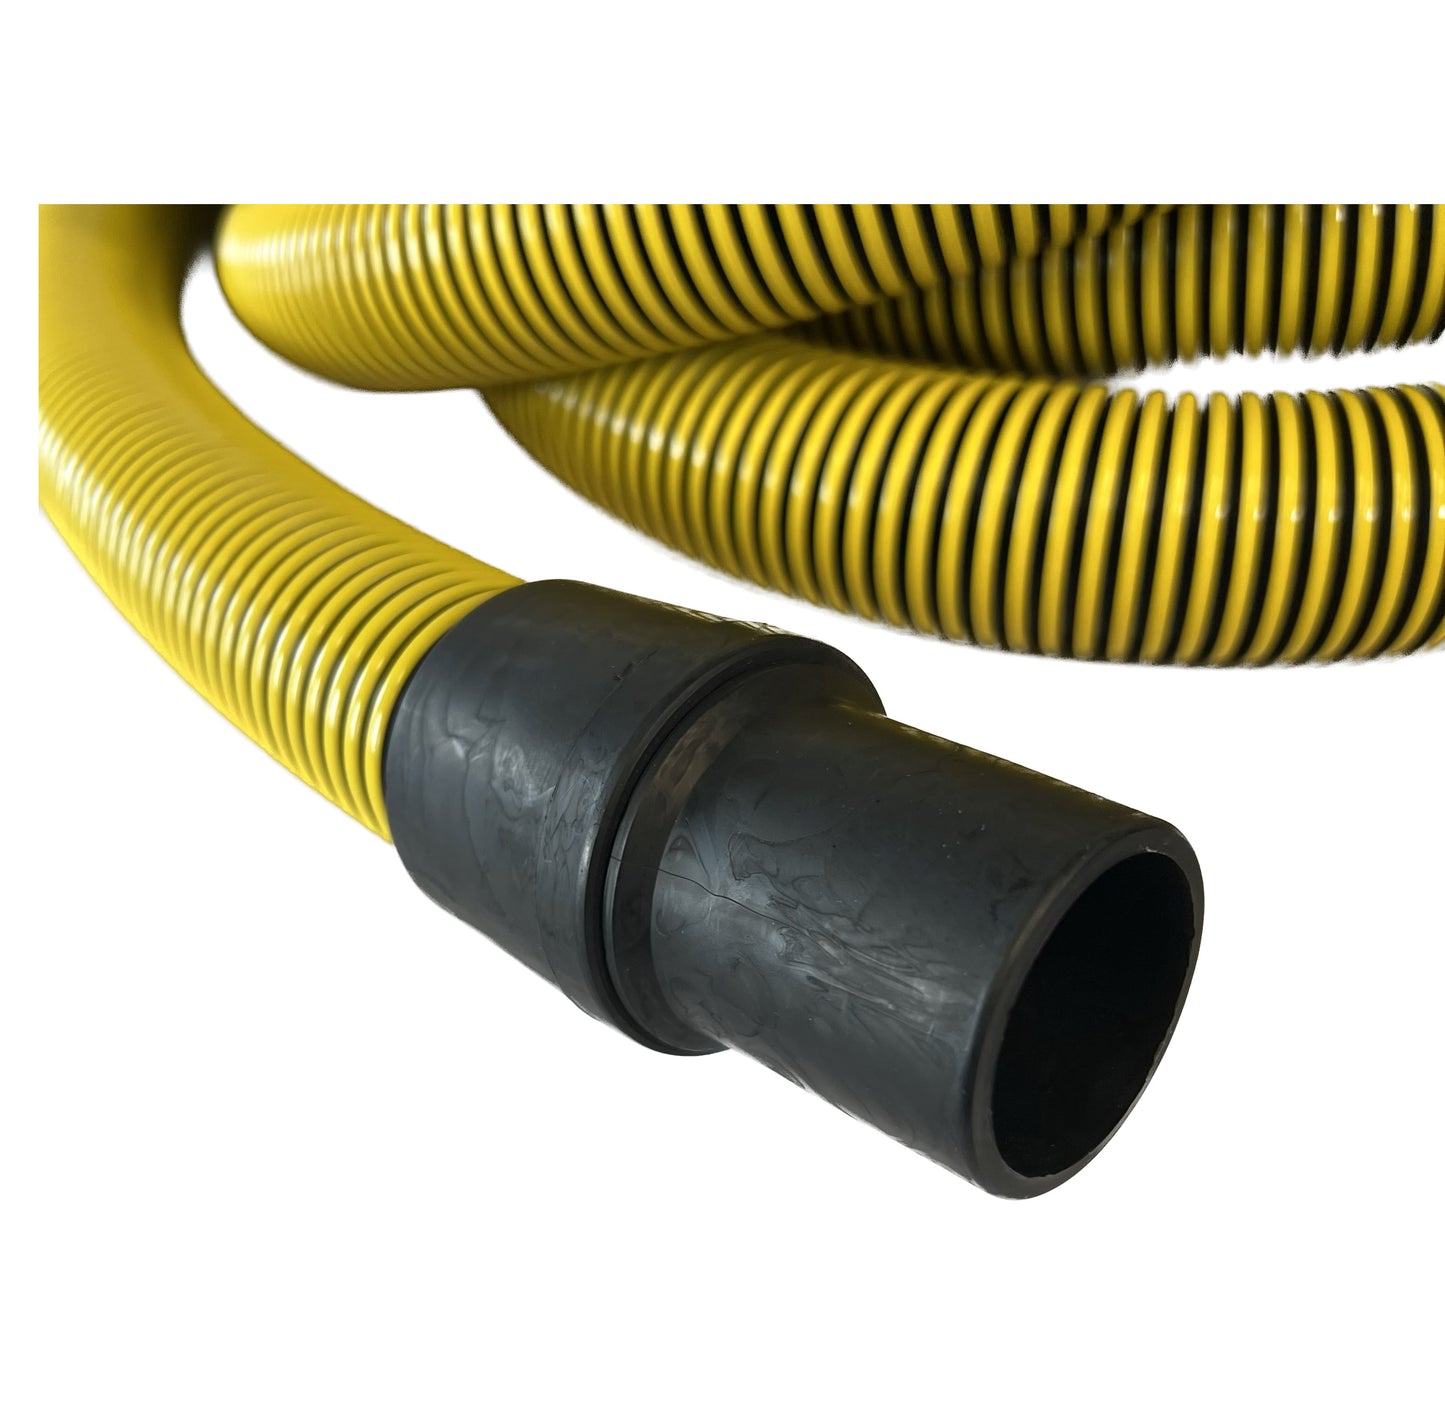 1-1/2" Conductive Vacuum Hose with Swivel Cuffs, Flexaust Genesis® StatPath® Plus Hose, Black and Yellow, 10', 15', 25' and 50' Lengths, Fits Non-Latching Inlet Valves